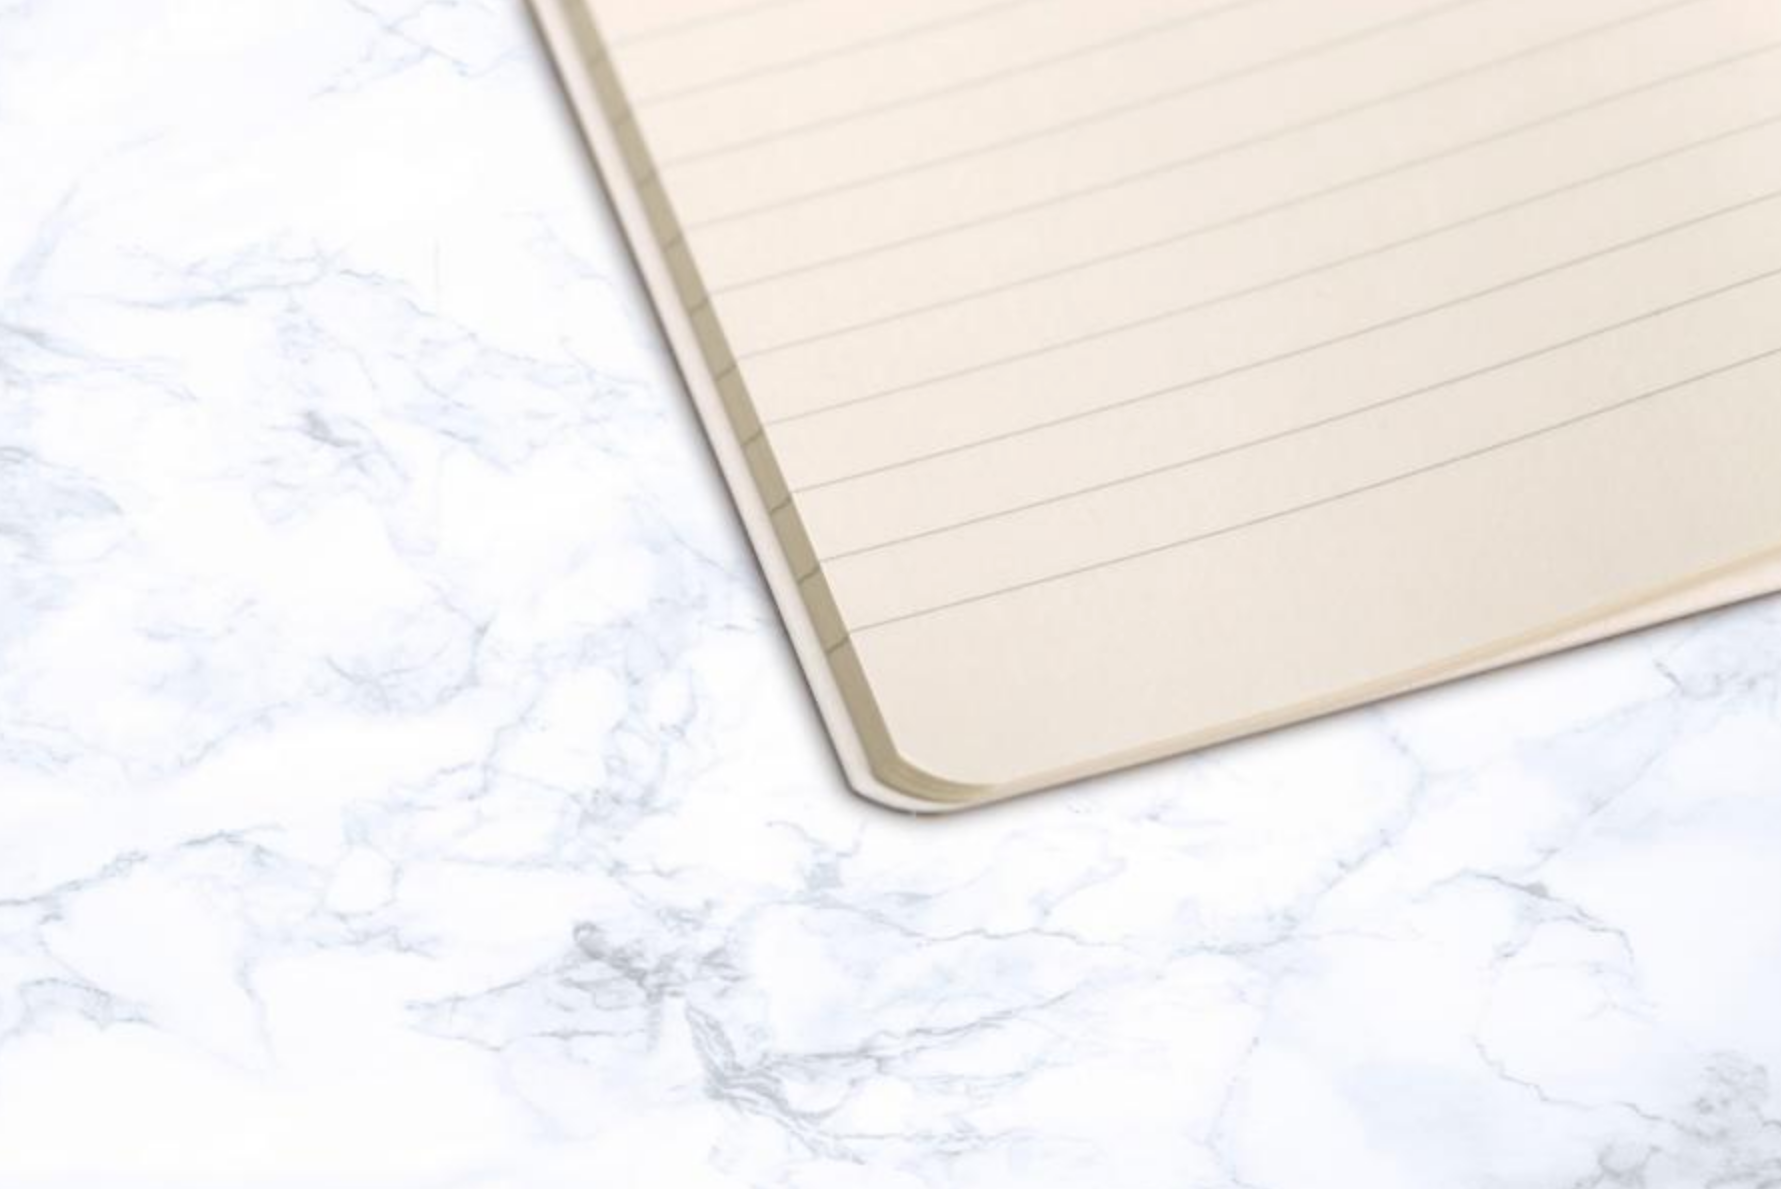 Clairefontaine A5 Neo Deco Notebook "Constellation"